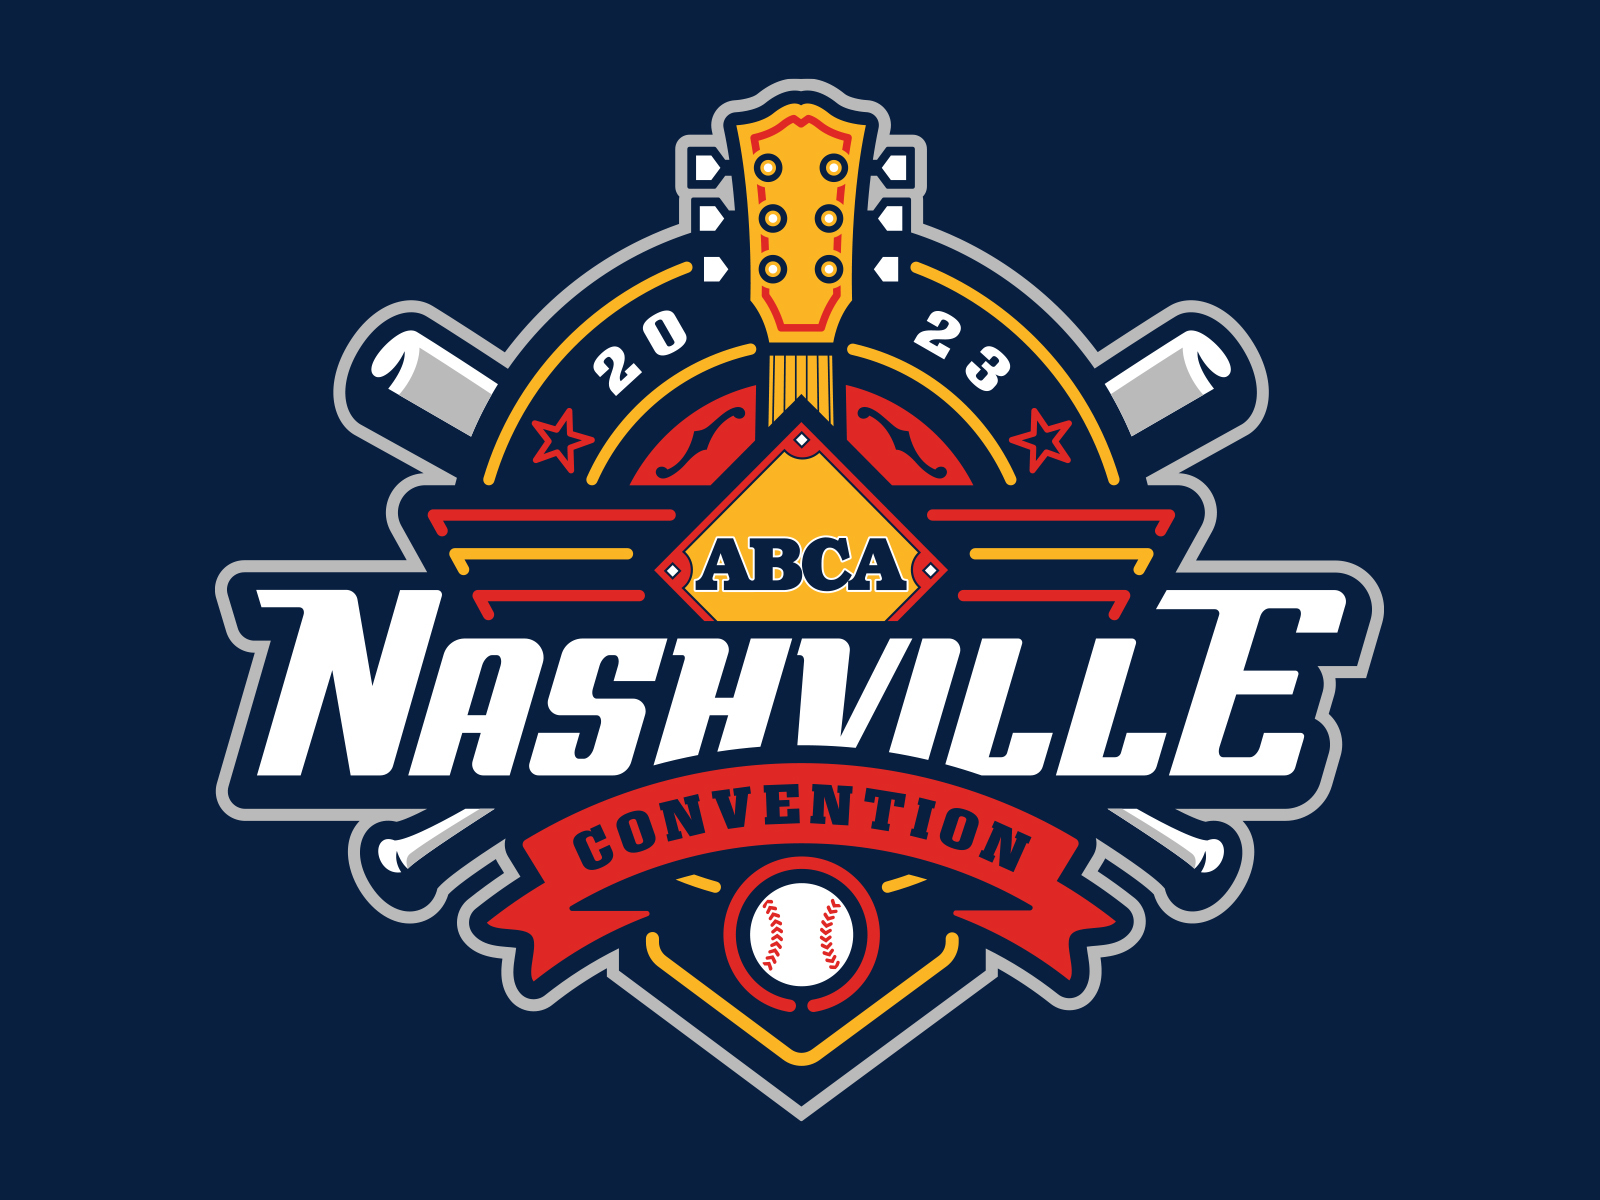 ABCA 2023 Nashville Convention by Torch Creative on Dribbble